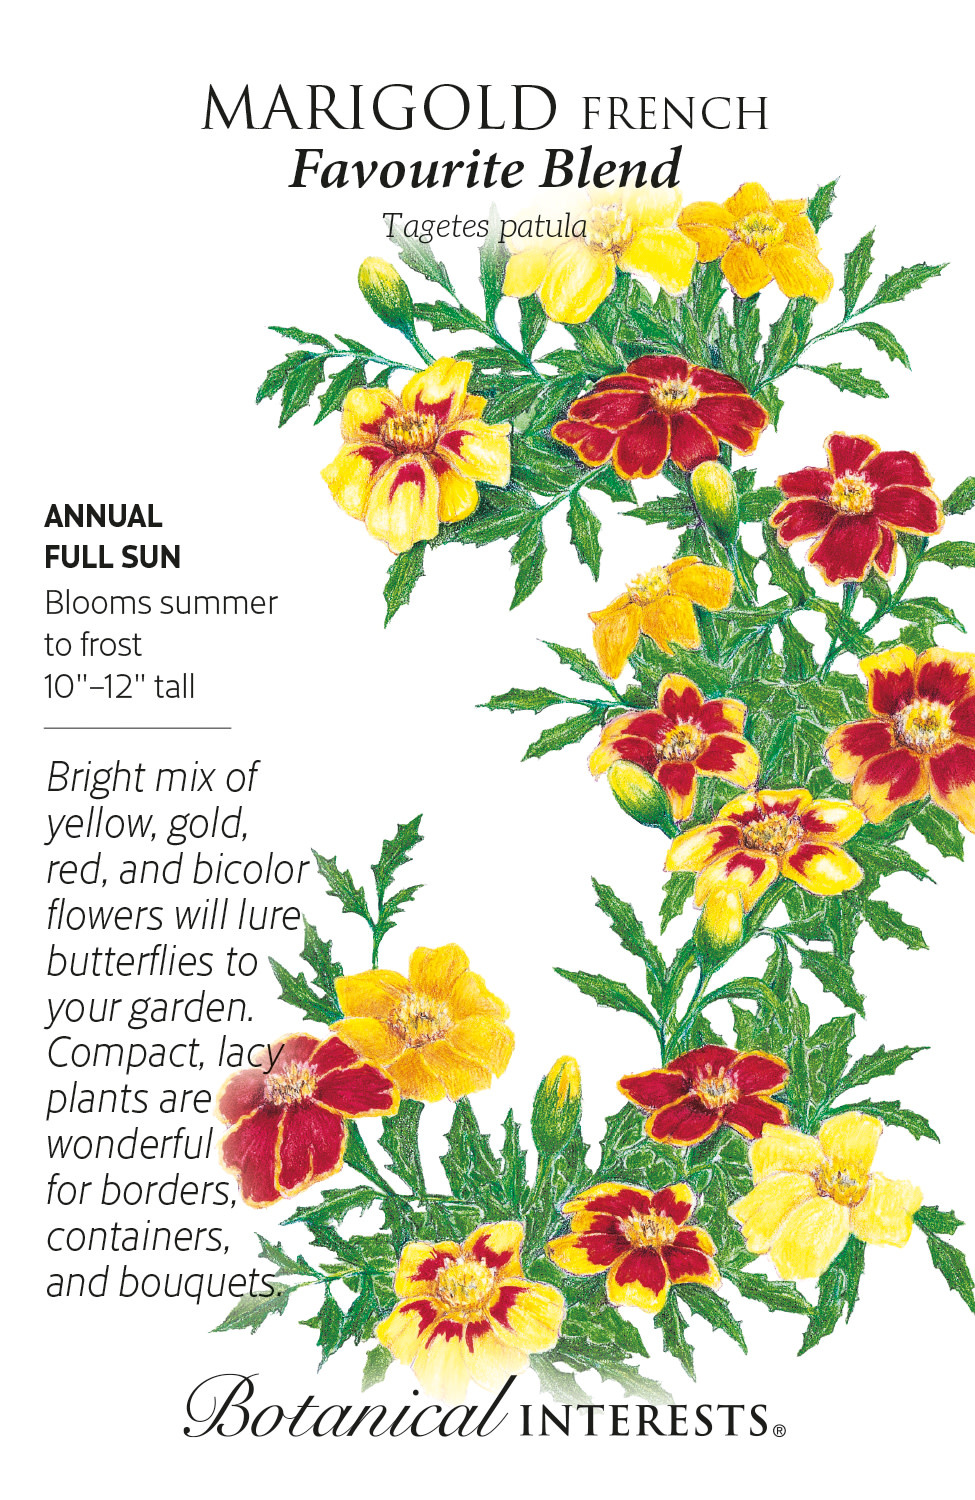 Seed Flwr Marigold French Favourite Blend - Tagetes patula